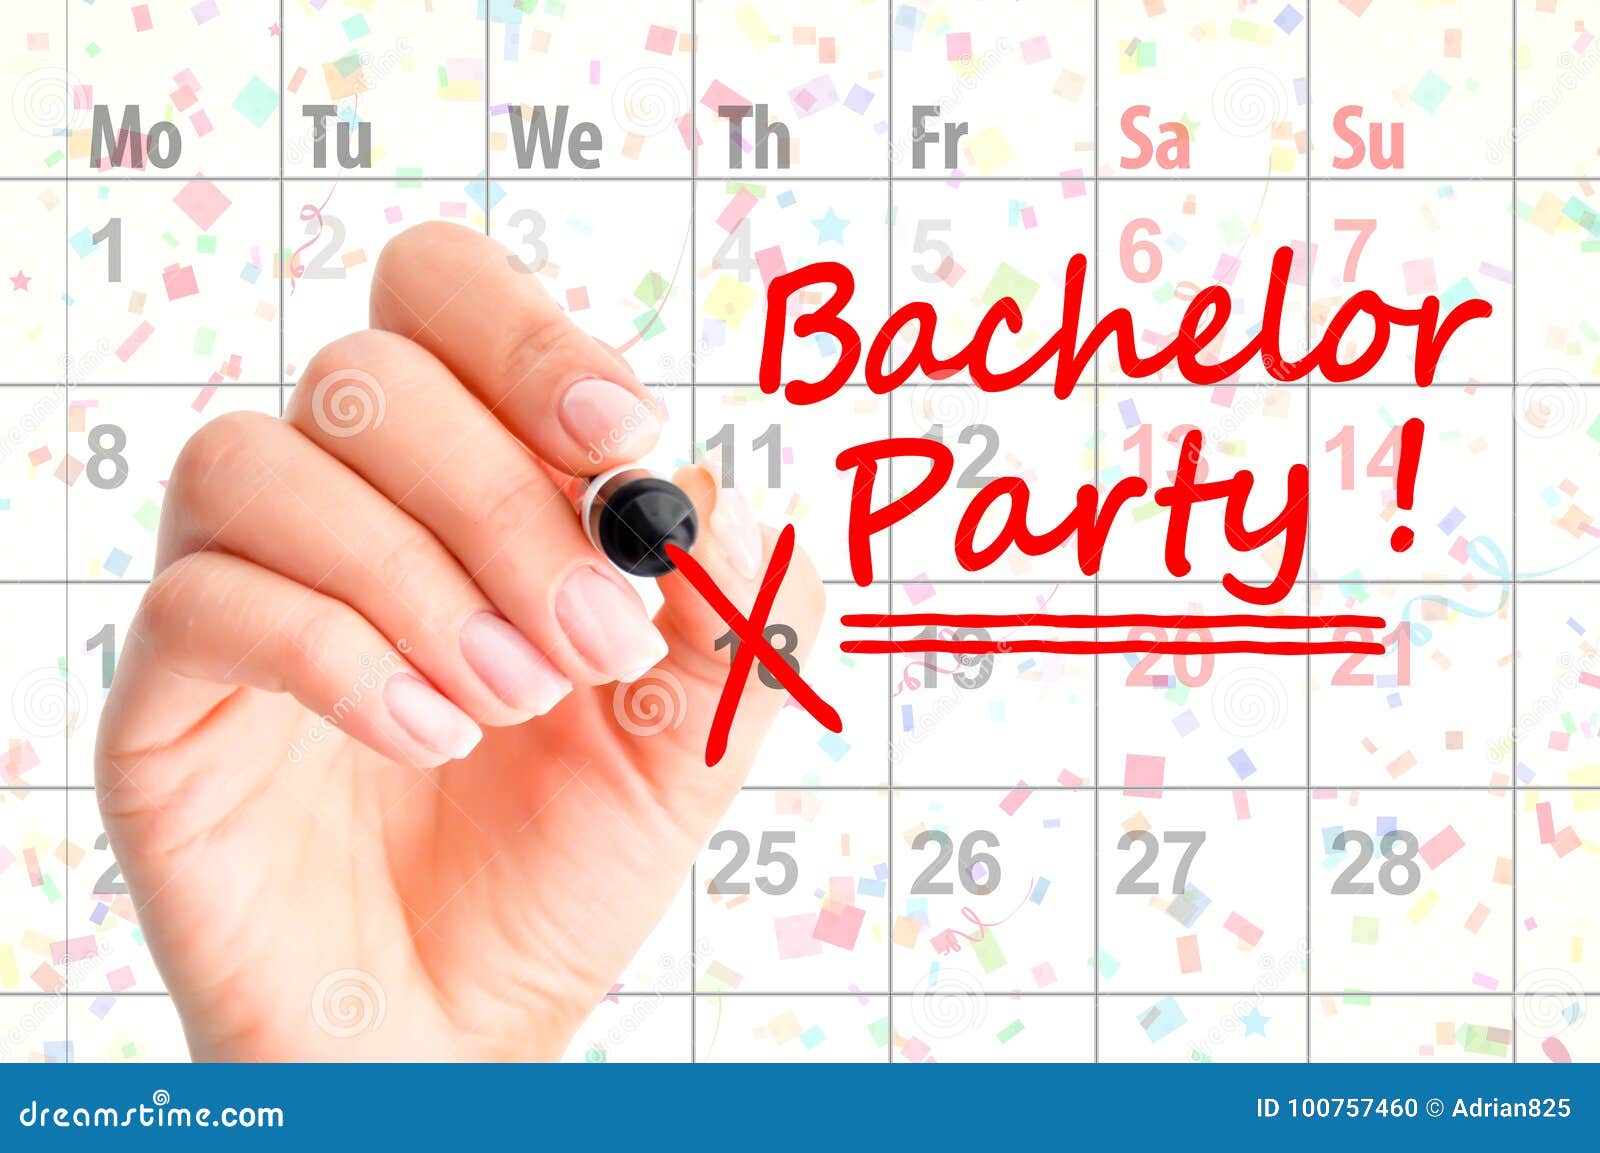 bachelor party noted on calendar